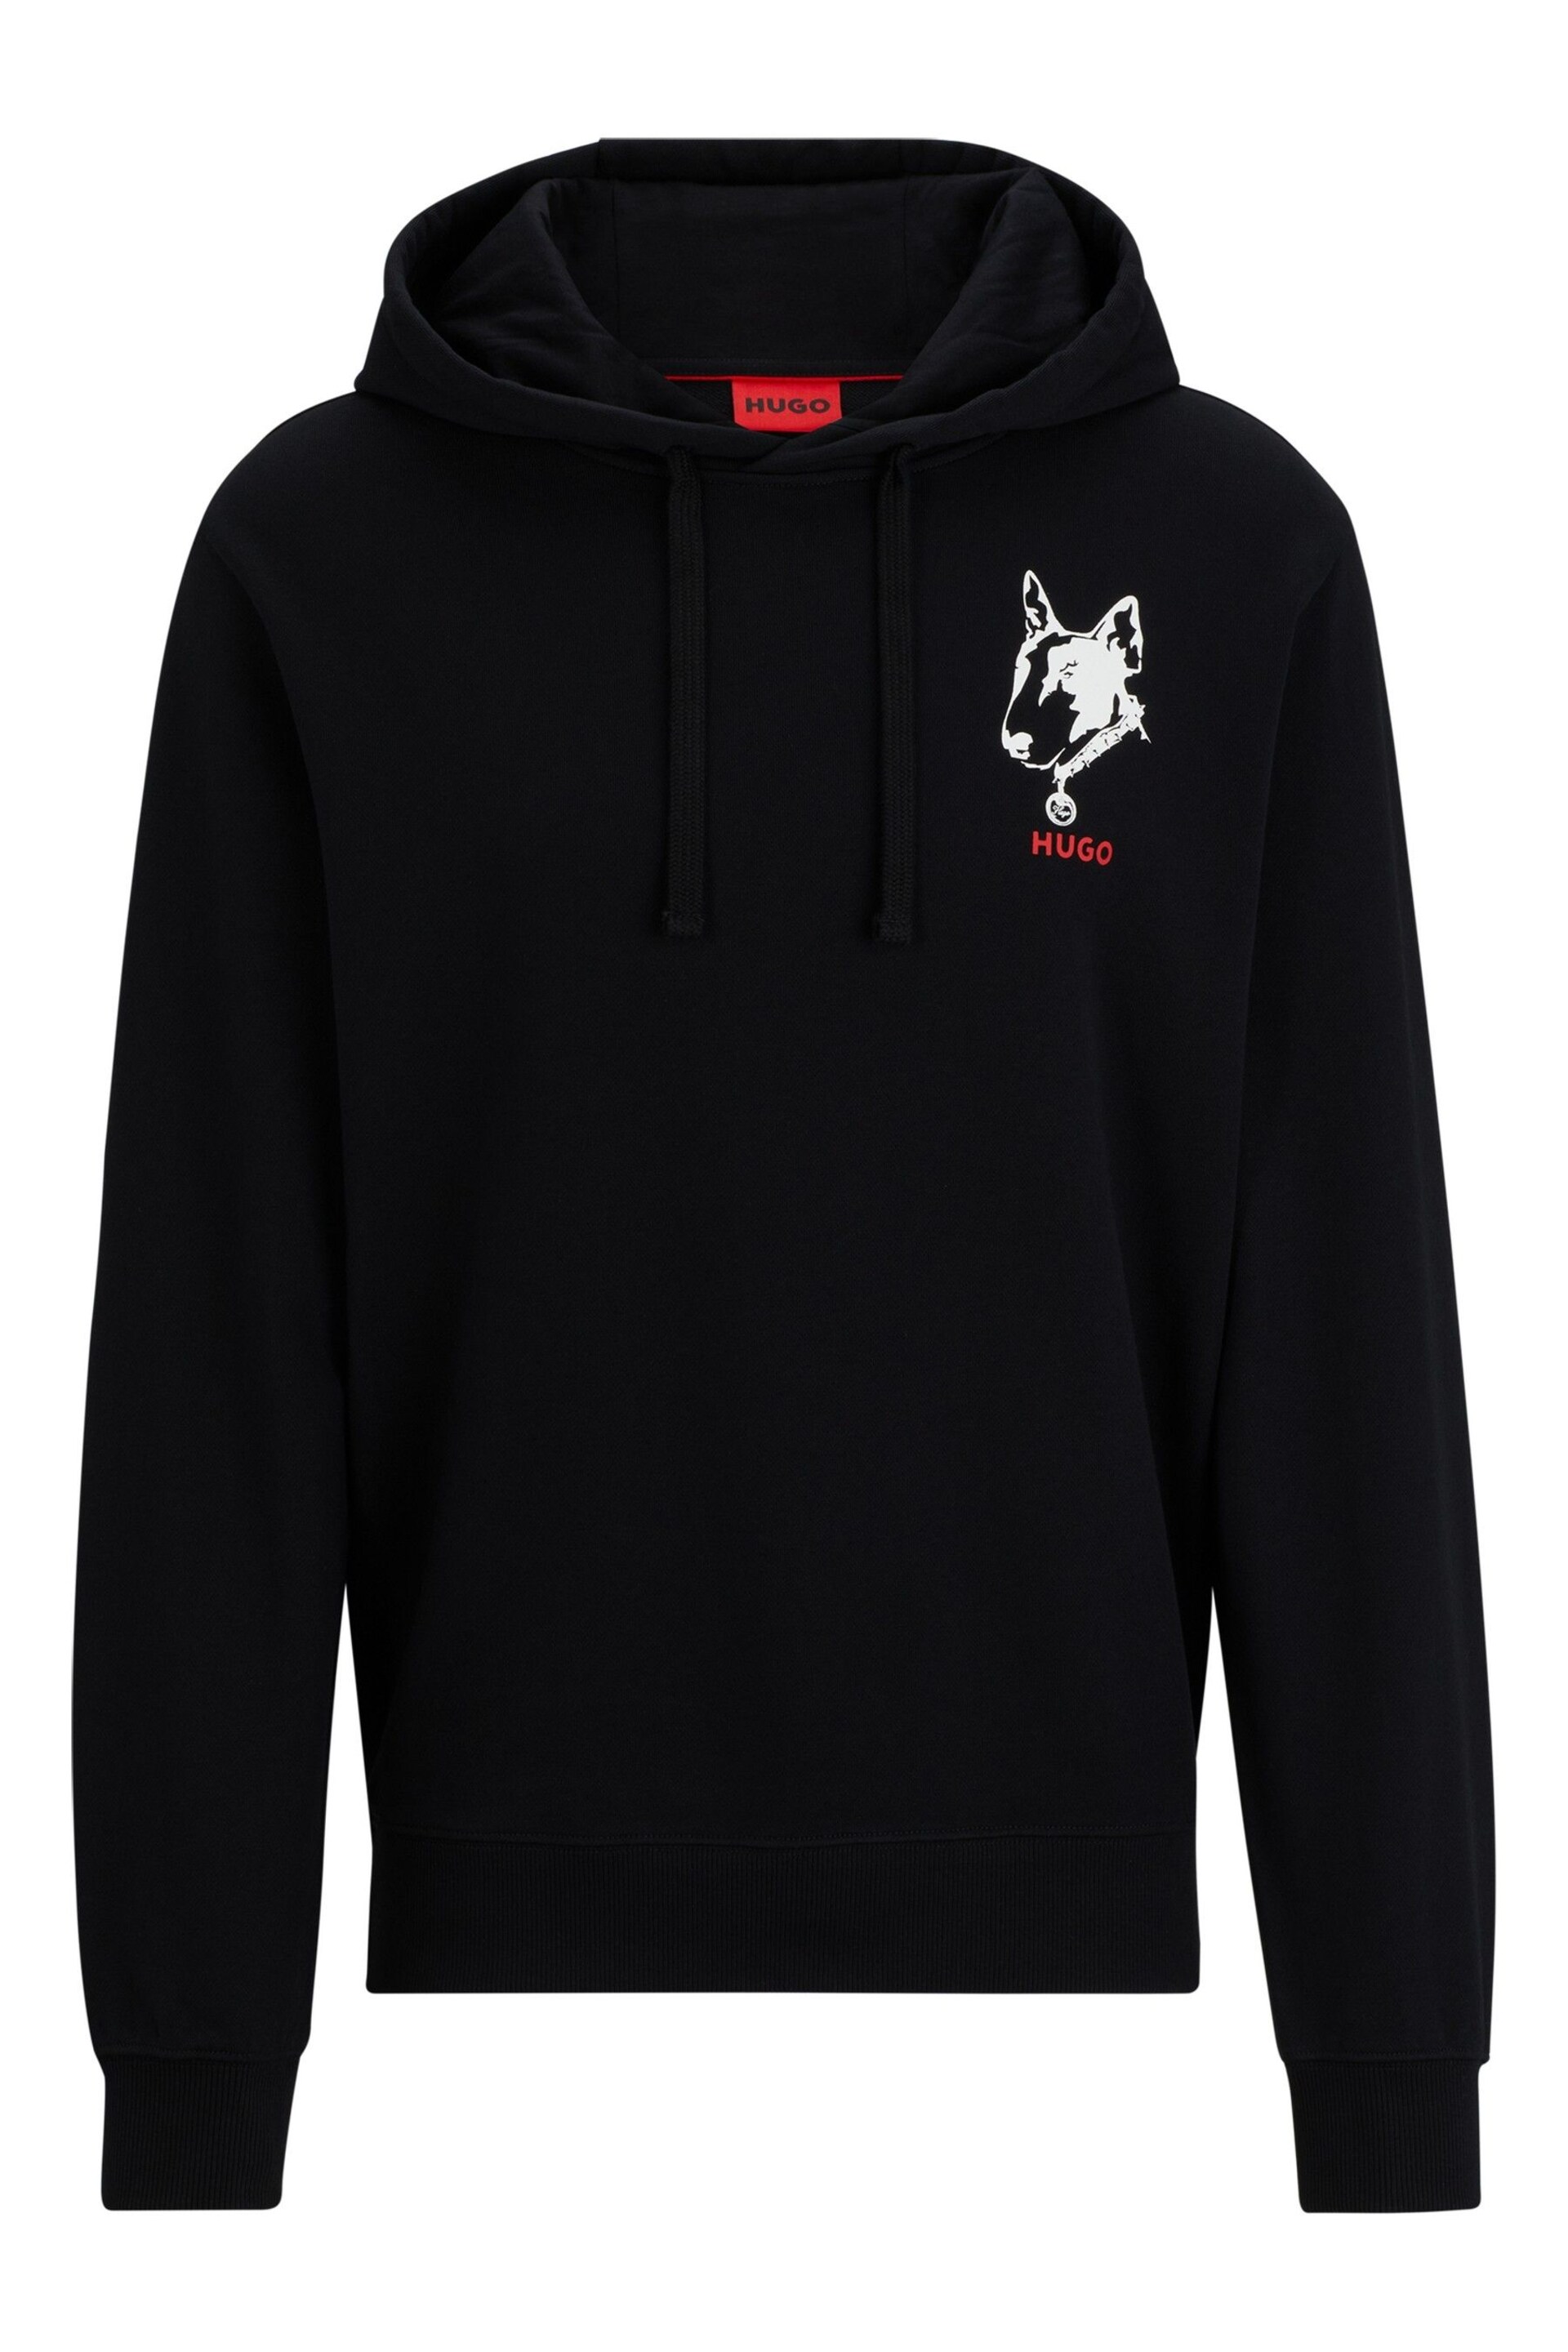 HUGO Black Dog Graphic Relaxed Fit Hoodie - Image 6 of 6